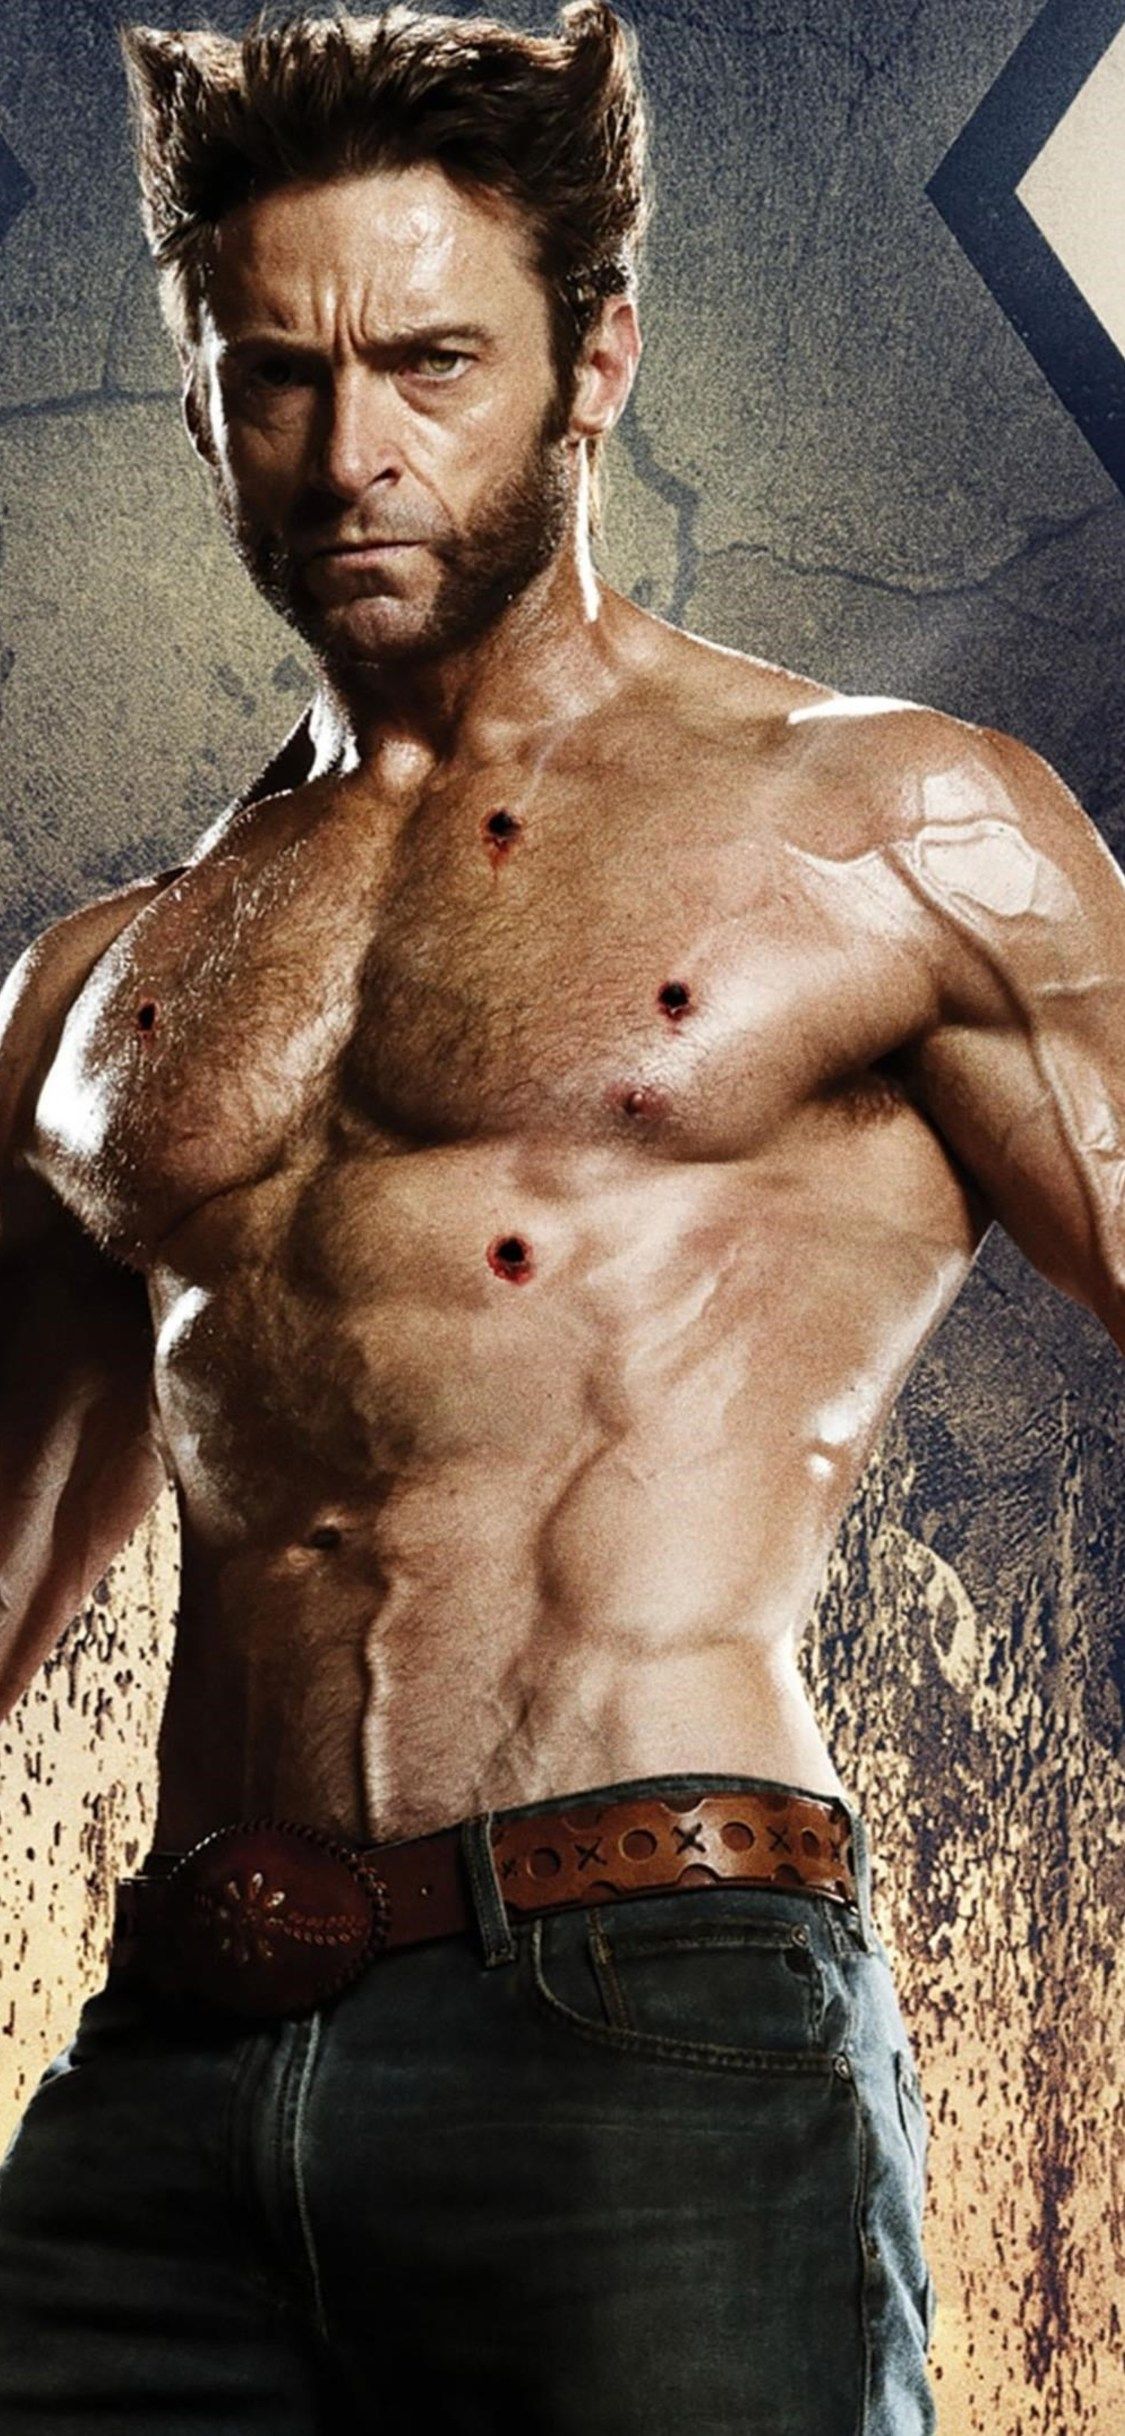 Wolverine Muscle iPhone Wallpaper Free Wolverine Muscle iPhone Background